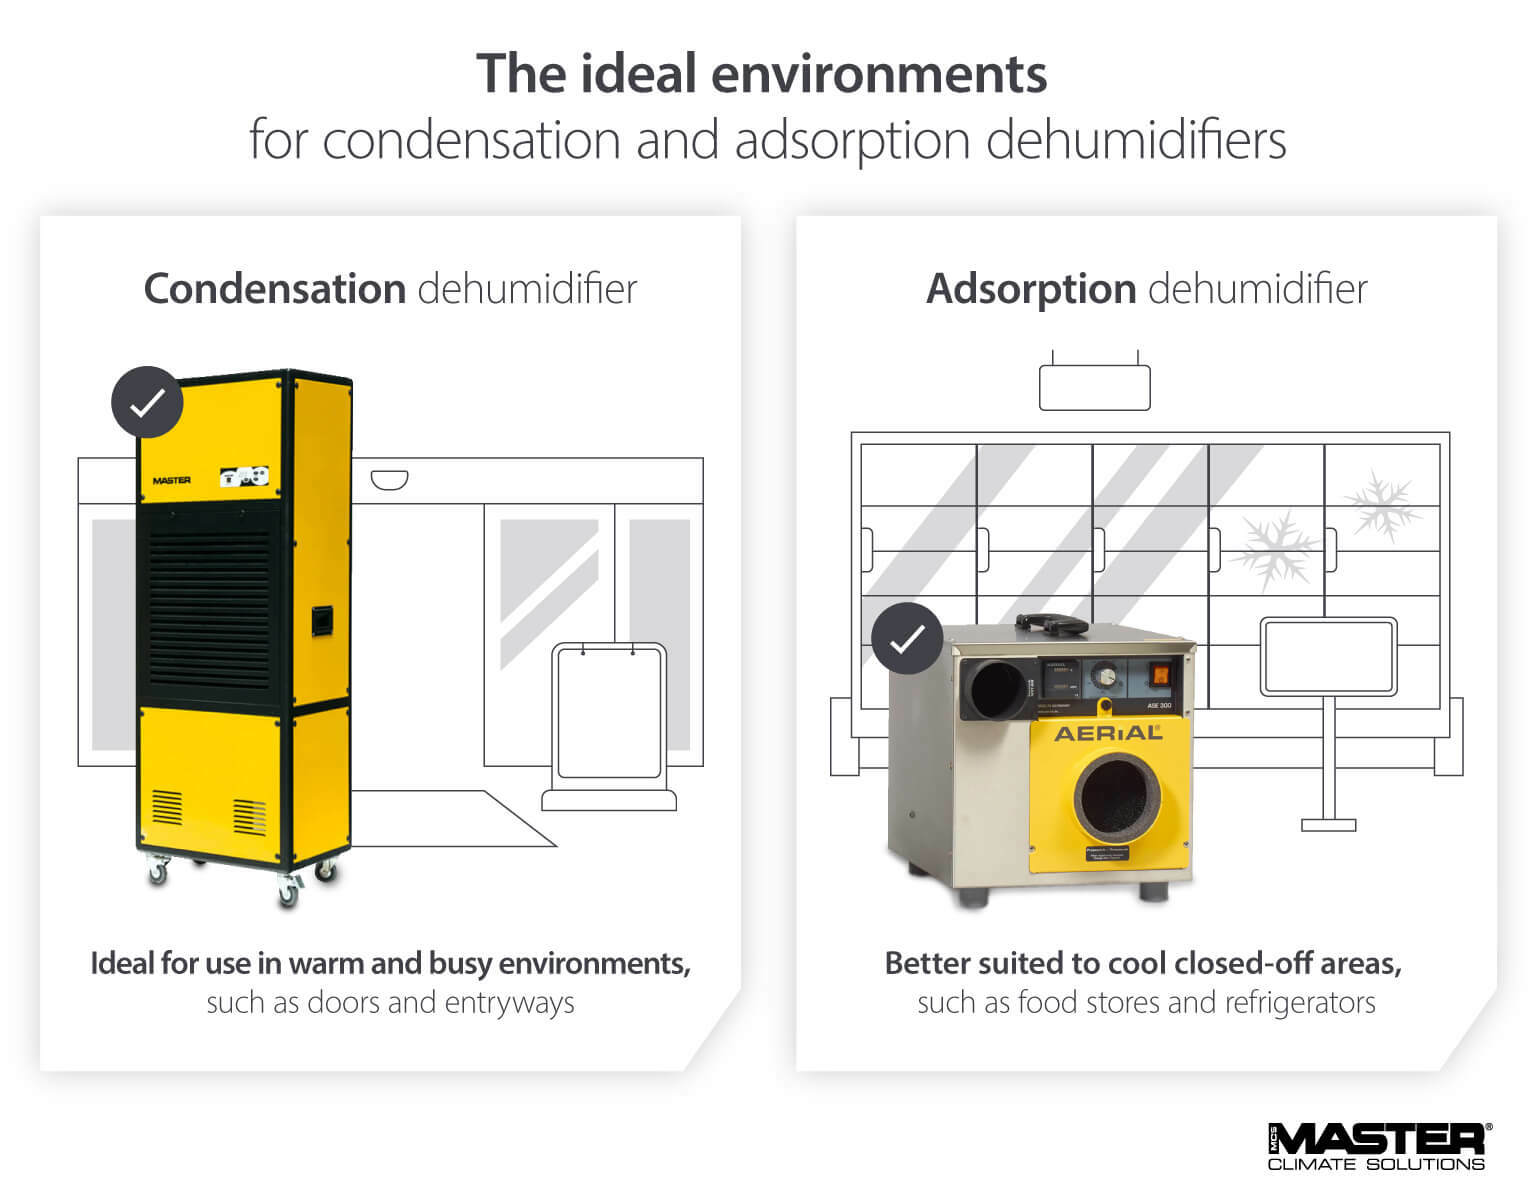 Condensation vs Adsorption dehumidifiers in a supermarket or food store - Infographic image